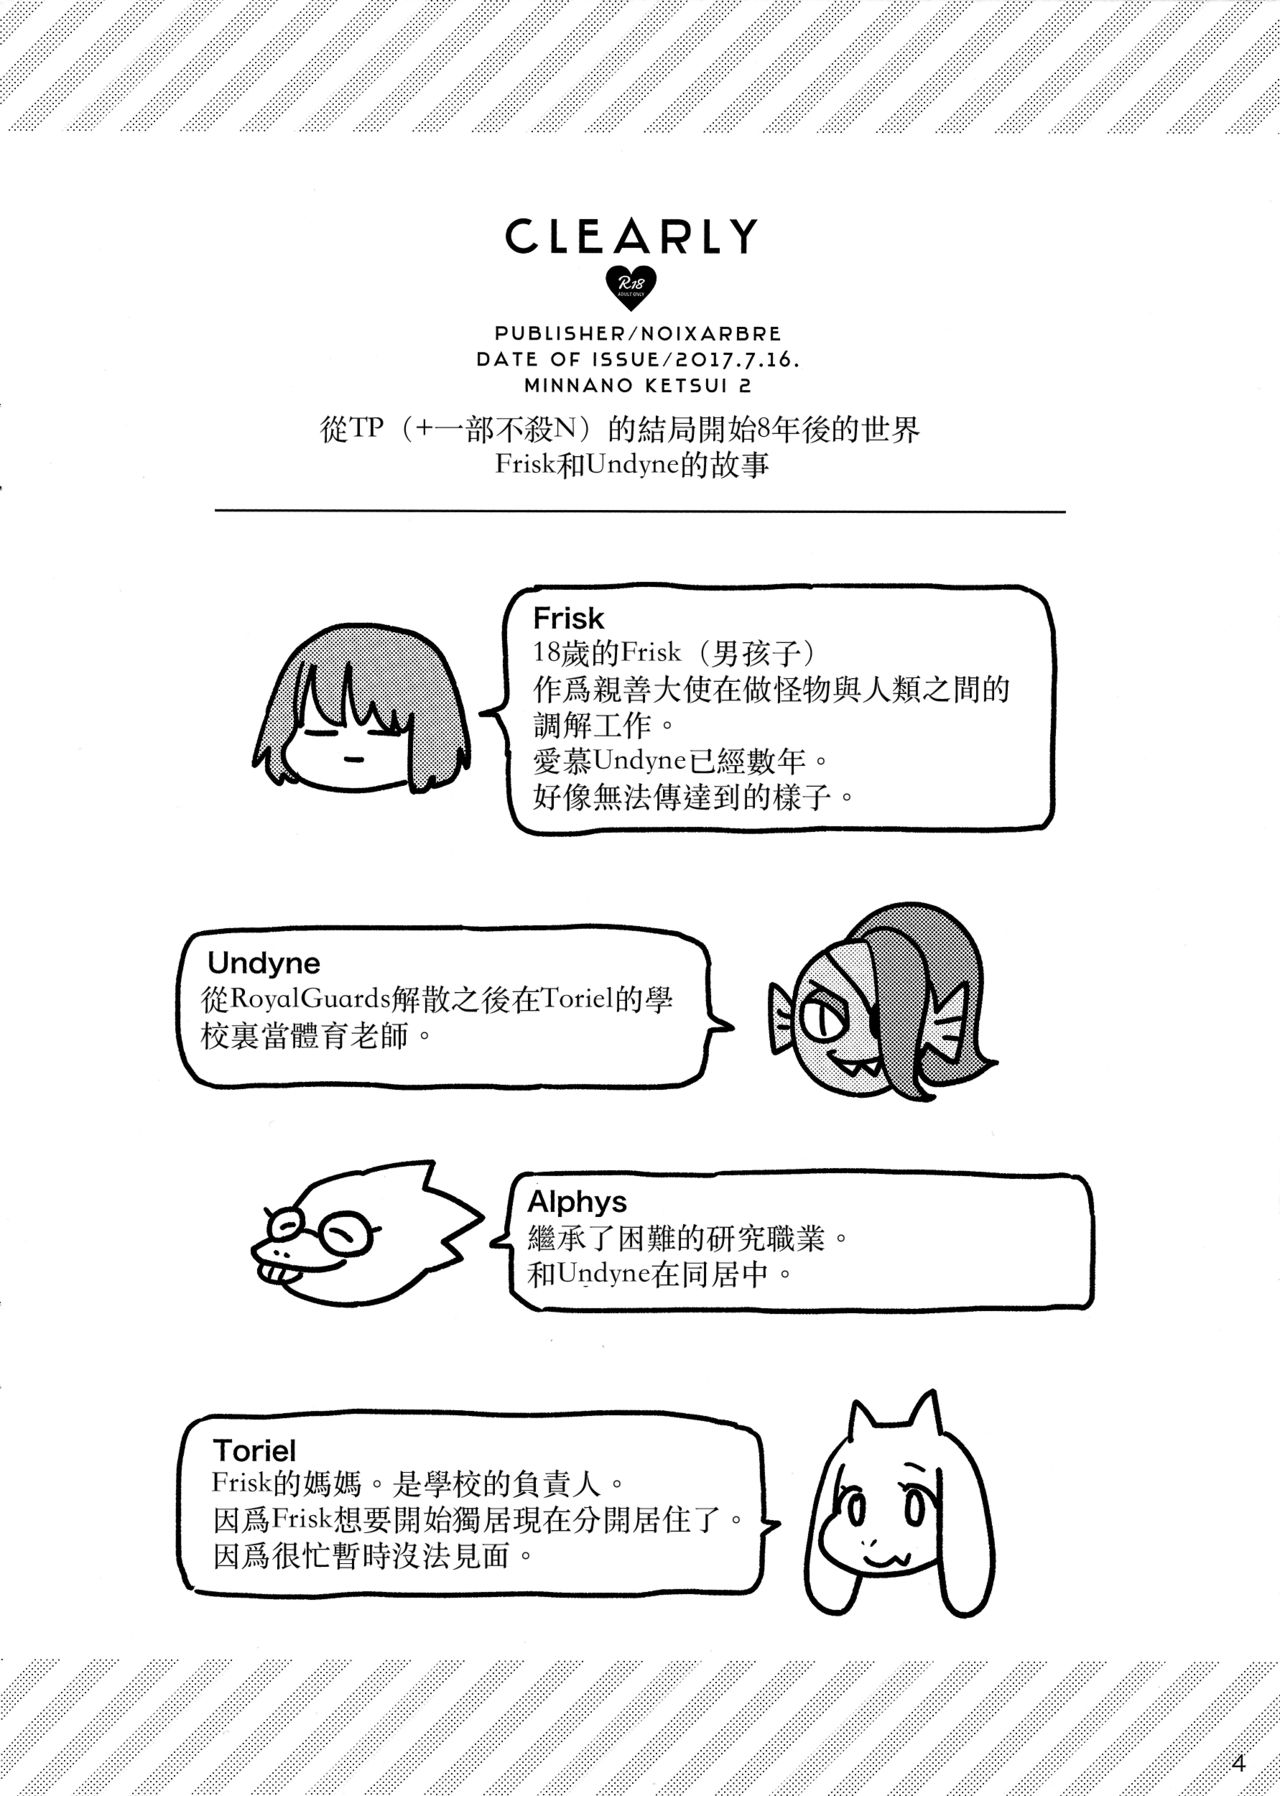 (Minna no Ketsui 2) [Pipiya (Noix)] CLEARLY (Undertale) [Chinese] [沒有漢化] (みんなの決意2) [ぴぴや (のあ)] CLEARLY (Undertale) [中国翻訳]